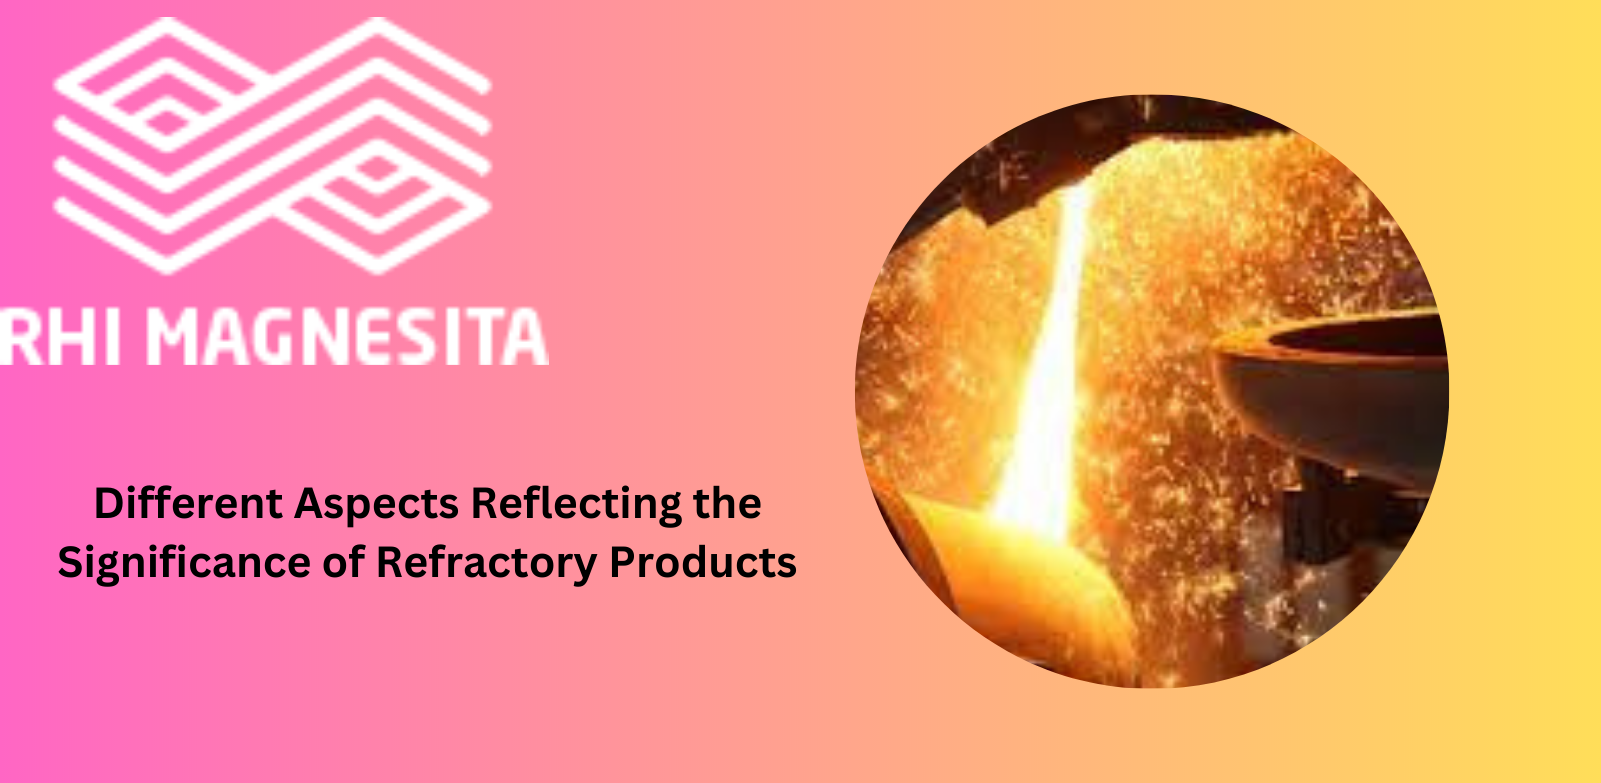 Different Aspects Reflecting the Significance of Refractory Products